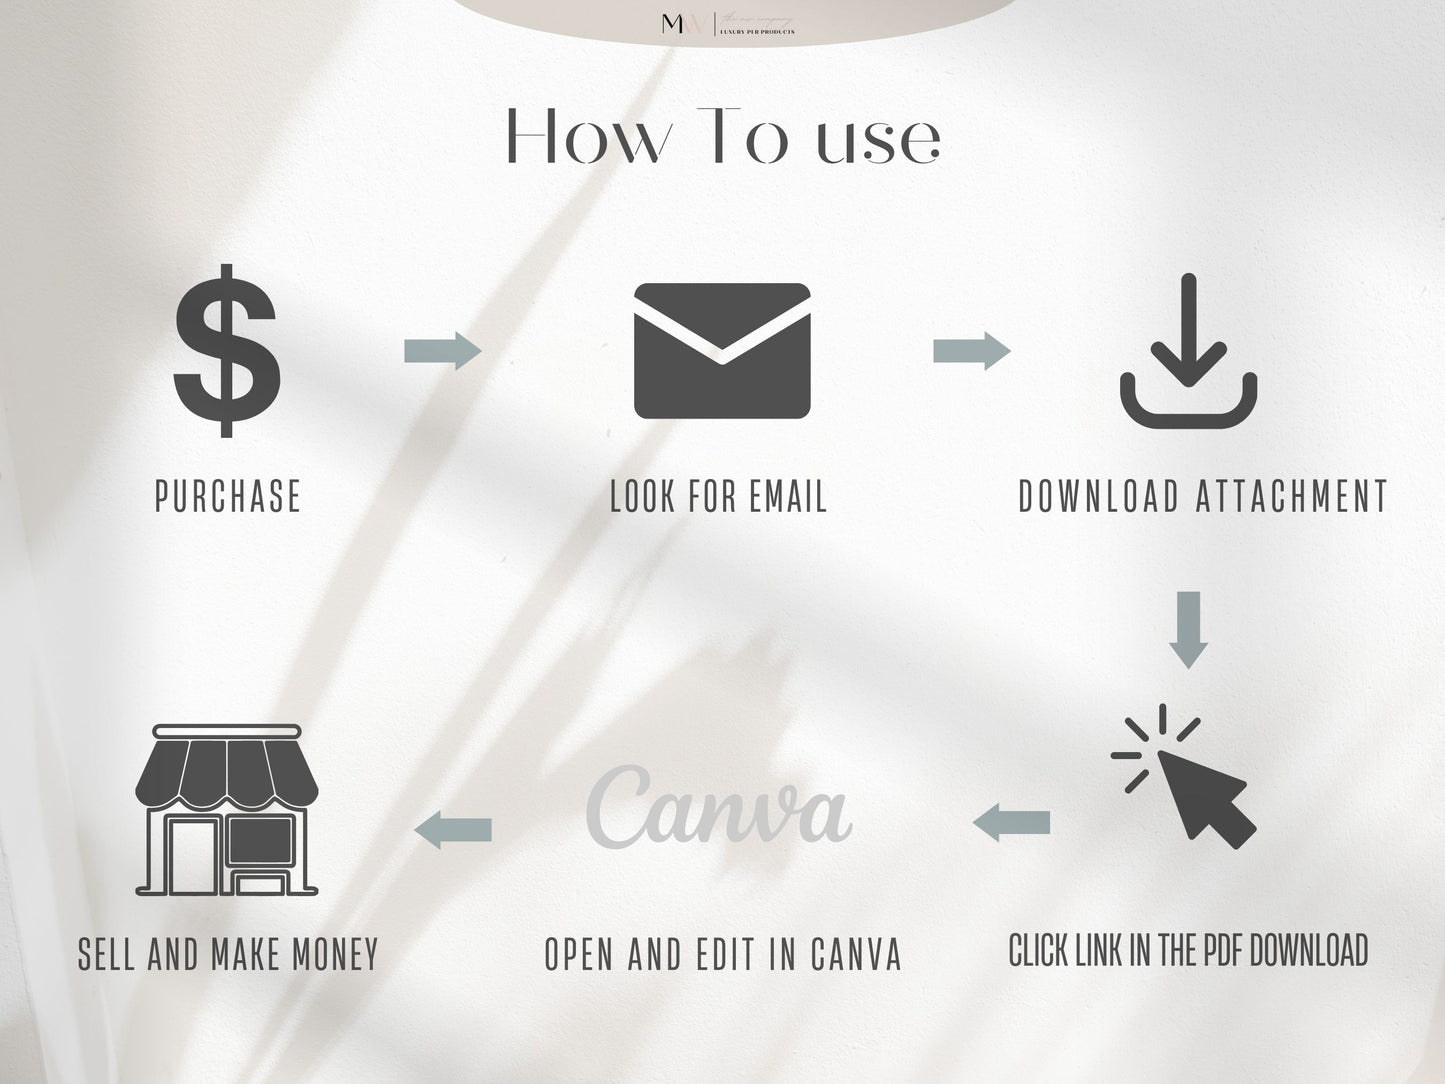 This slide show you how to download your product once you purchase it.You will download the attachment and then click the link for the template that comes in the PDF. You can then edit your digital planner in canva, then sell it to make money.